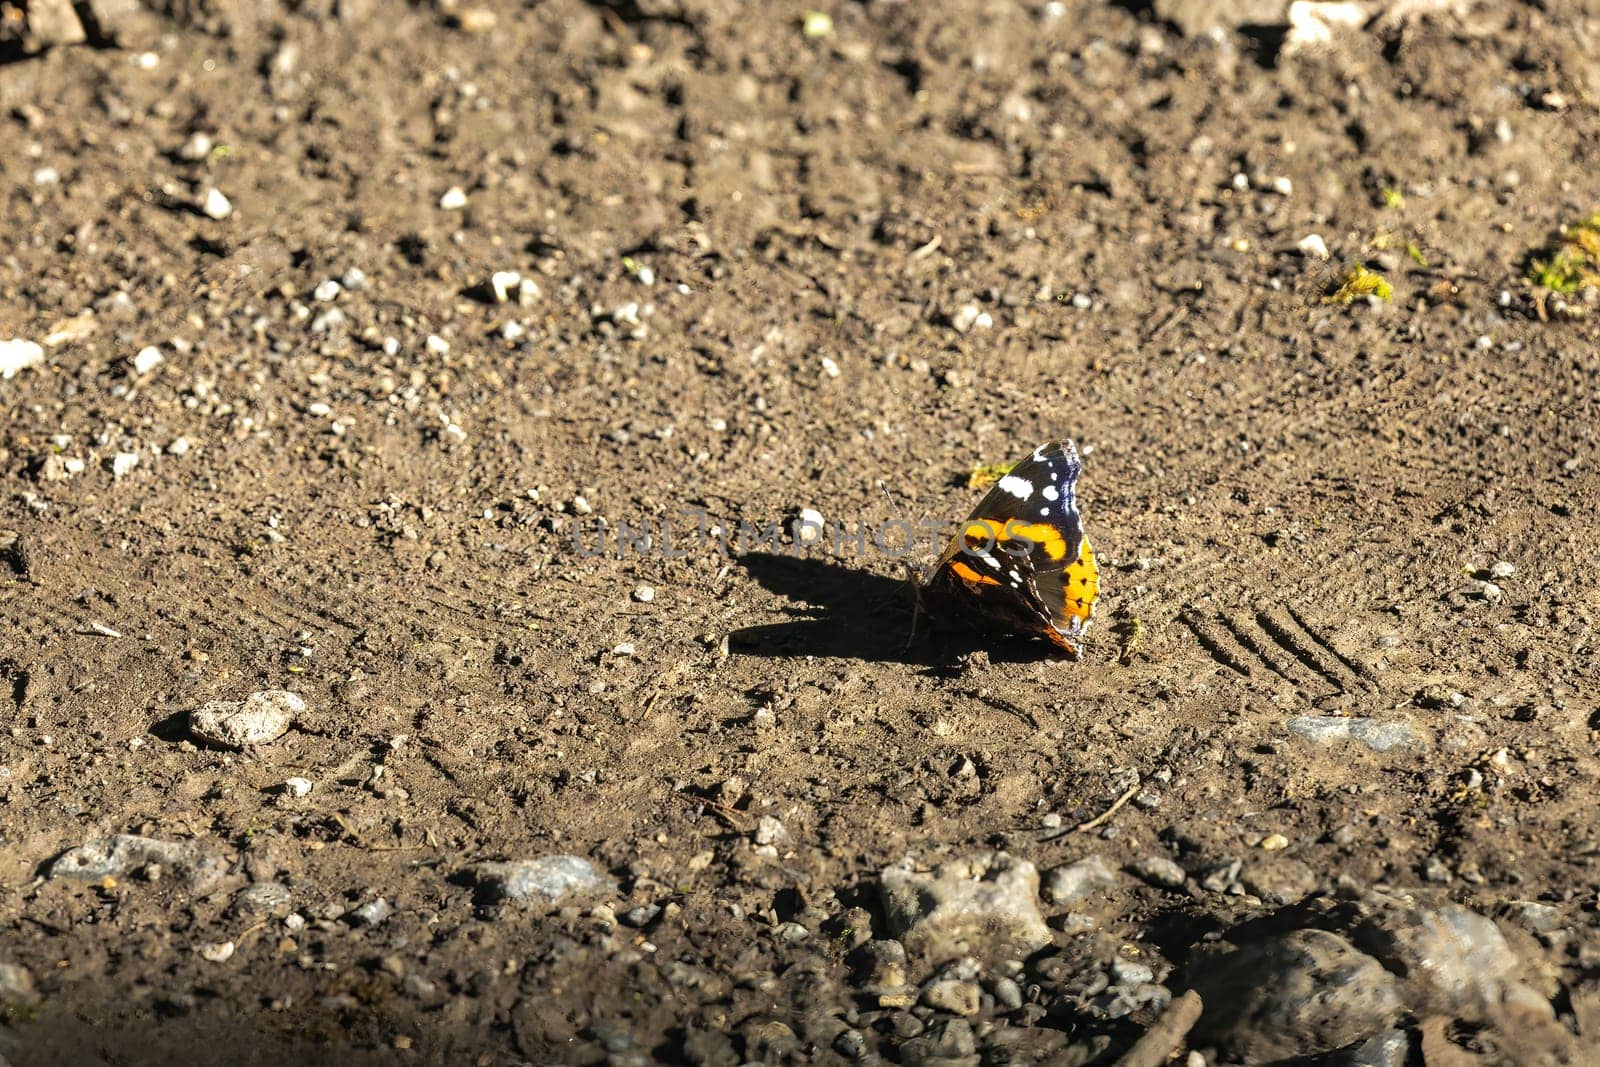 A red admiral butterfly on a dirt patch surrounded by rocks in an outdoor setting